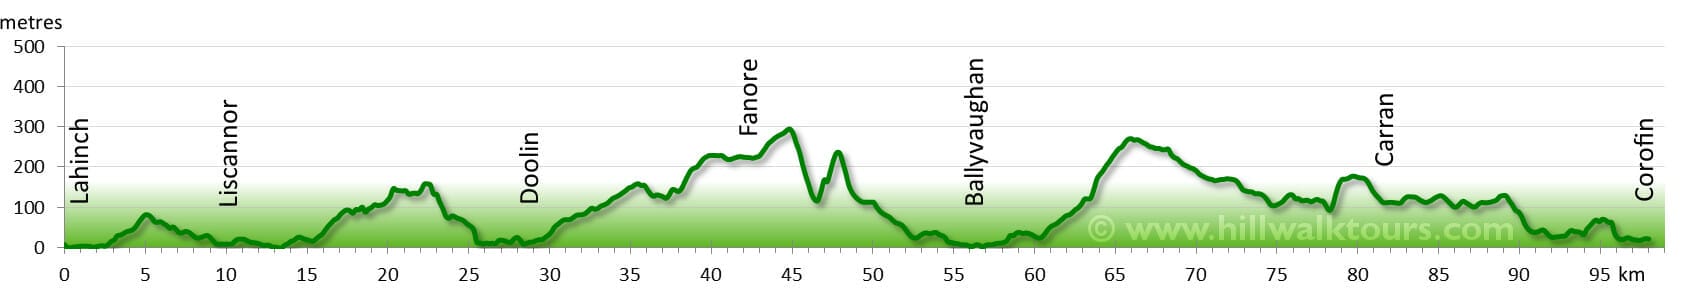 Elevation Profile for the Burren Way from Hillwalk Tours